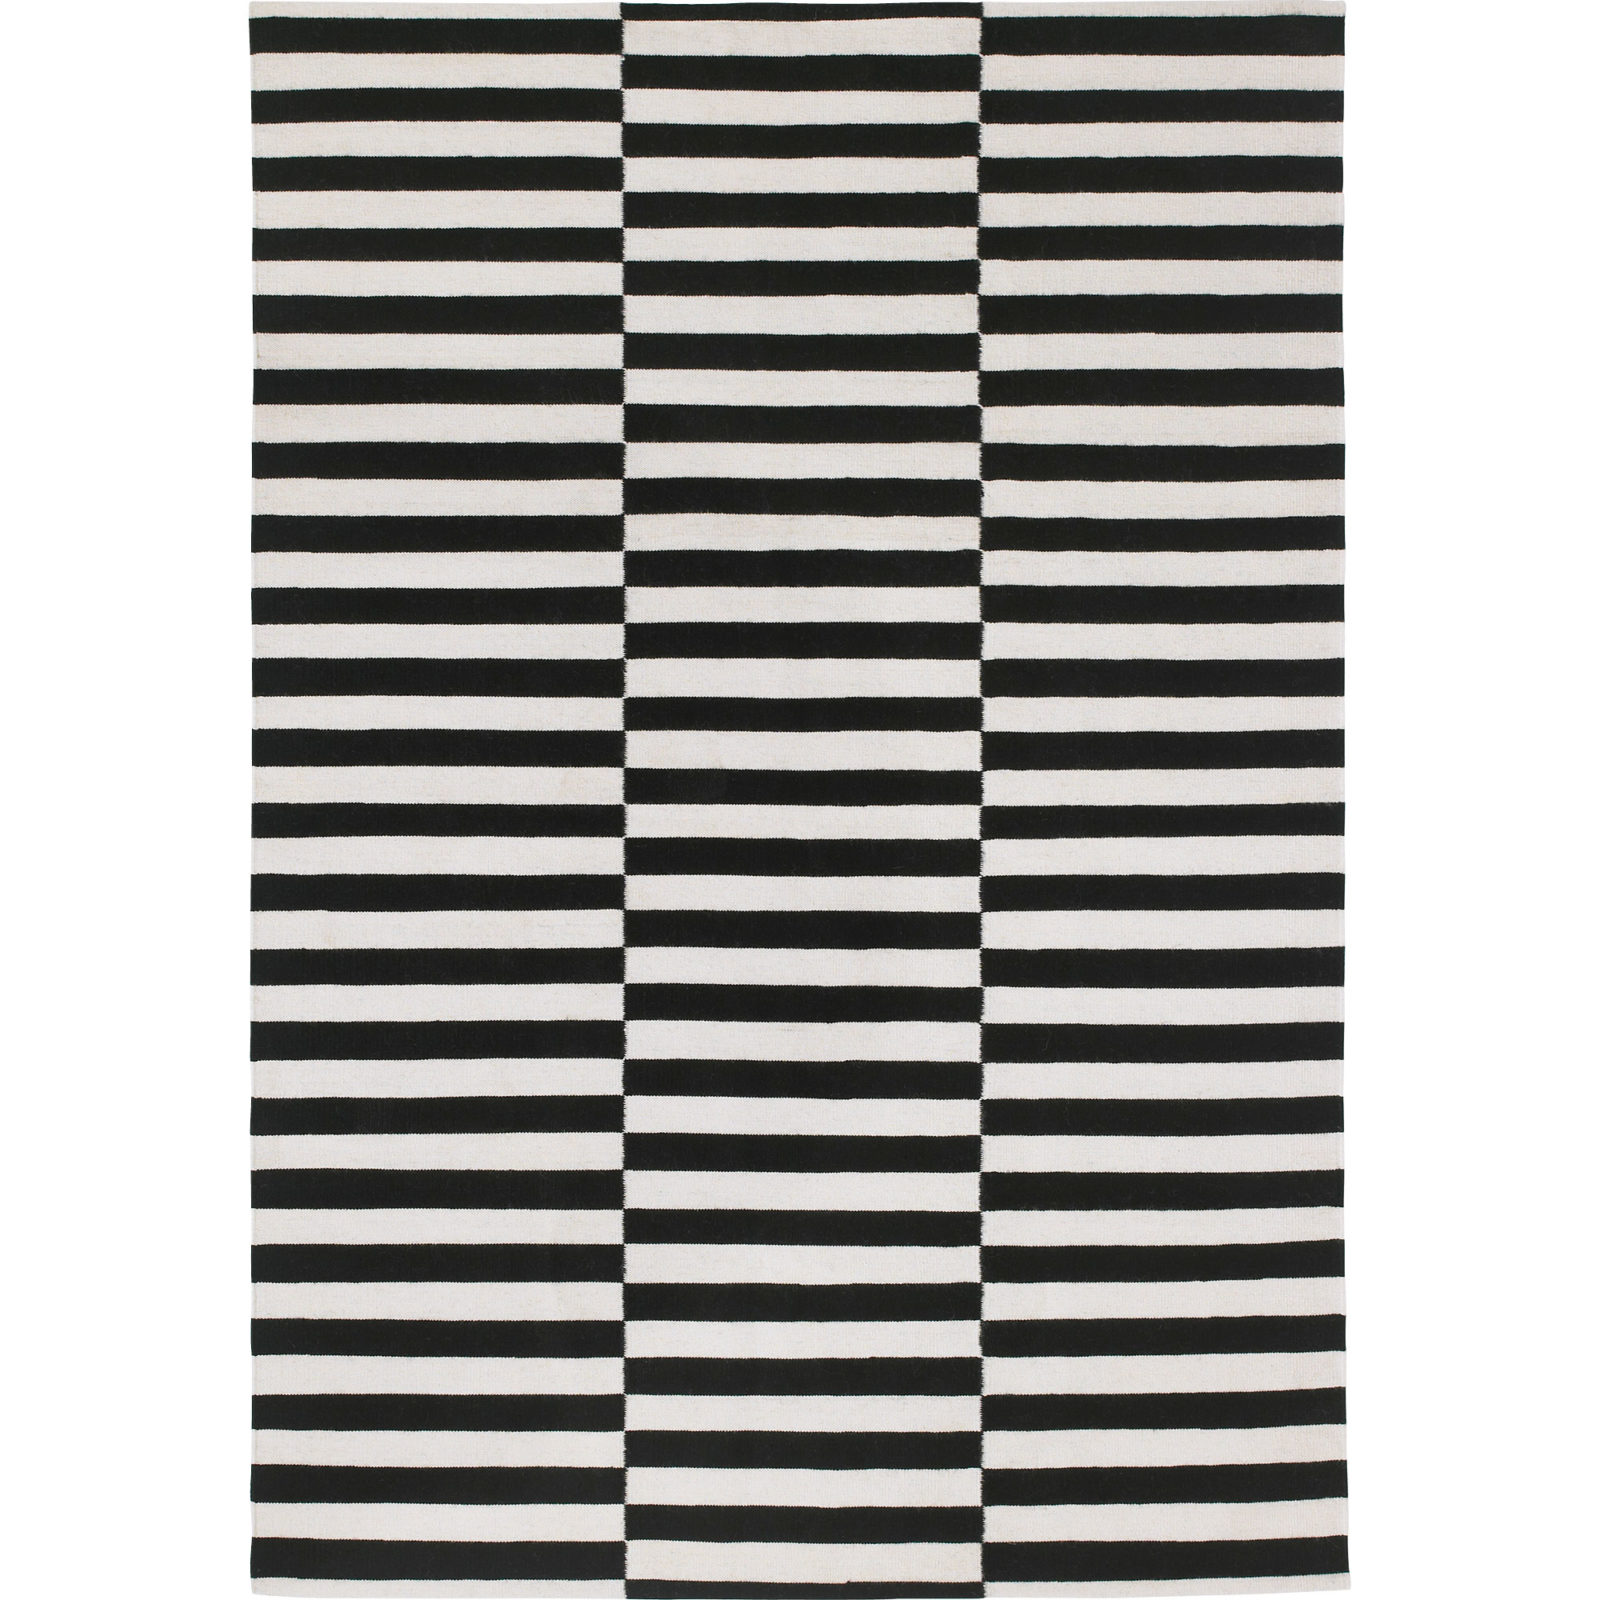 Wool rug with black and white pattern with asymmetric lines, STOCKHOLM RAND.